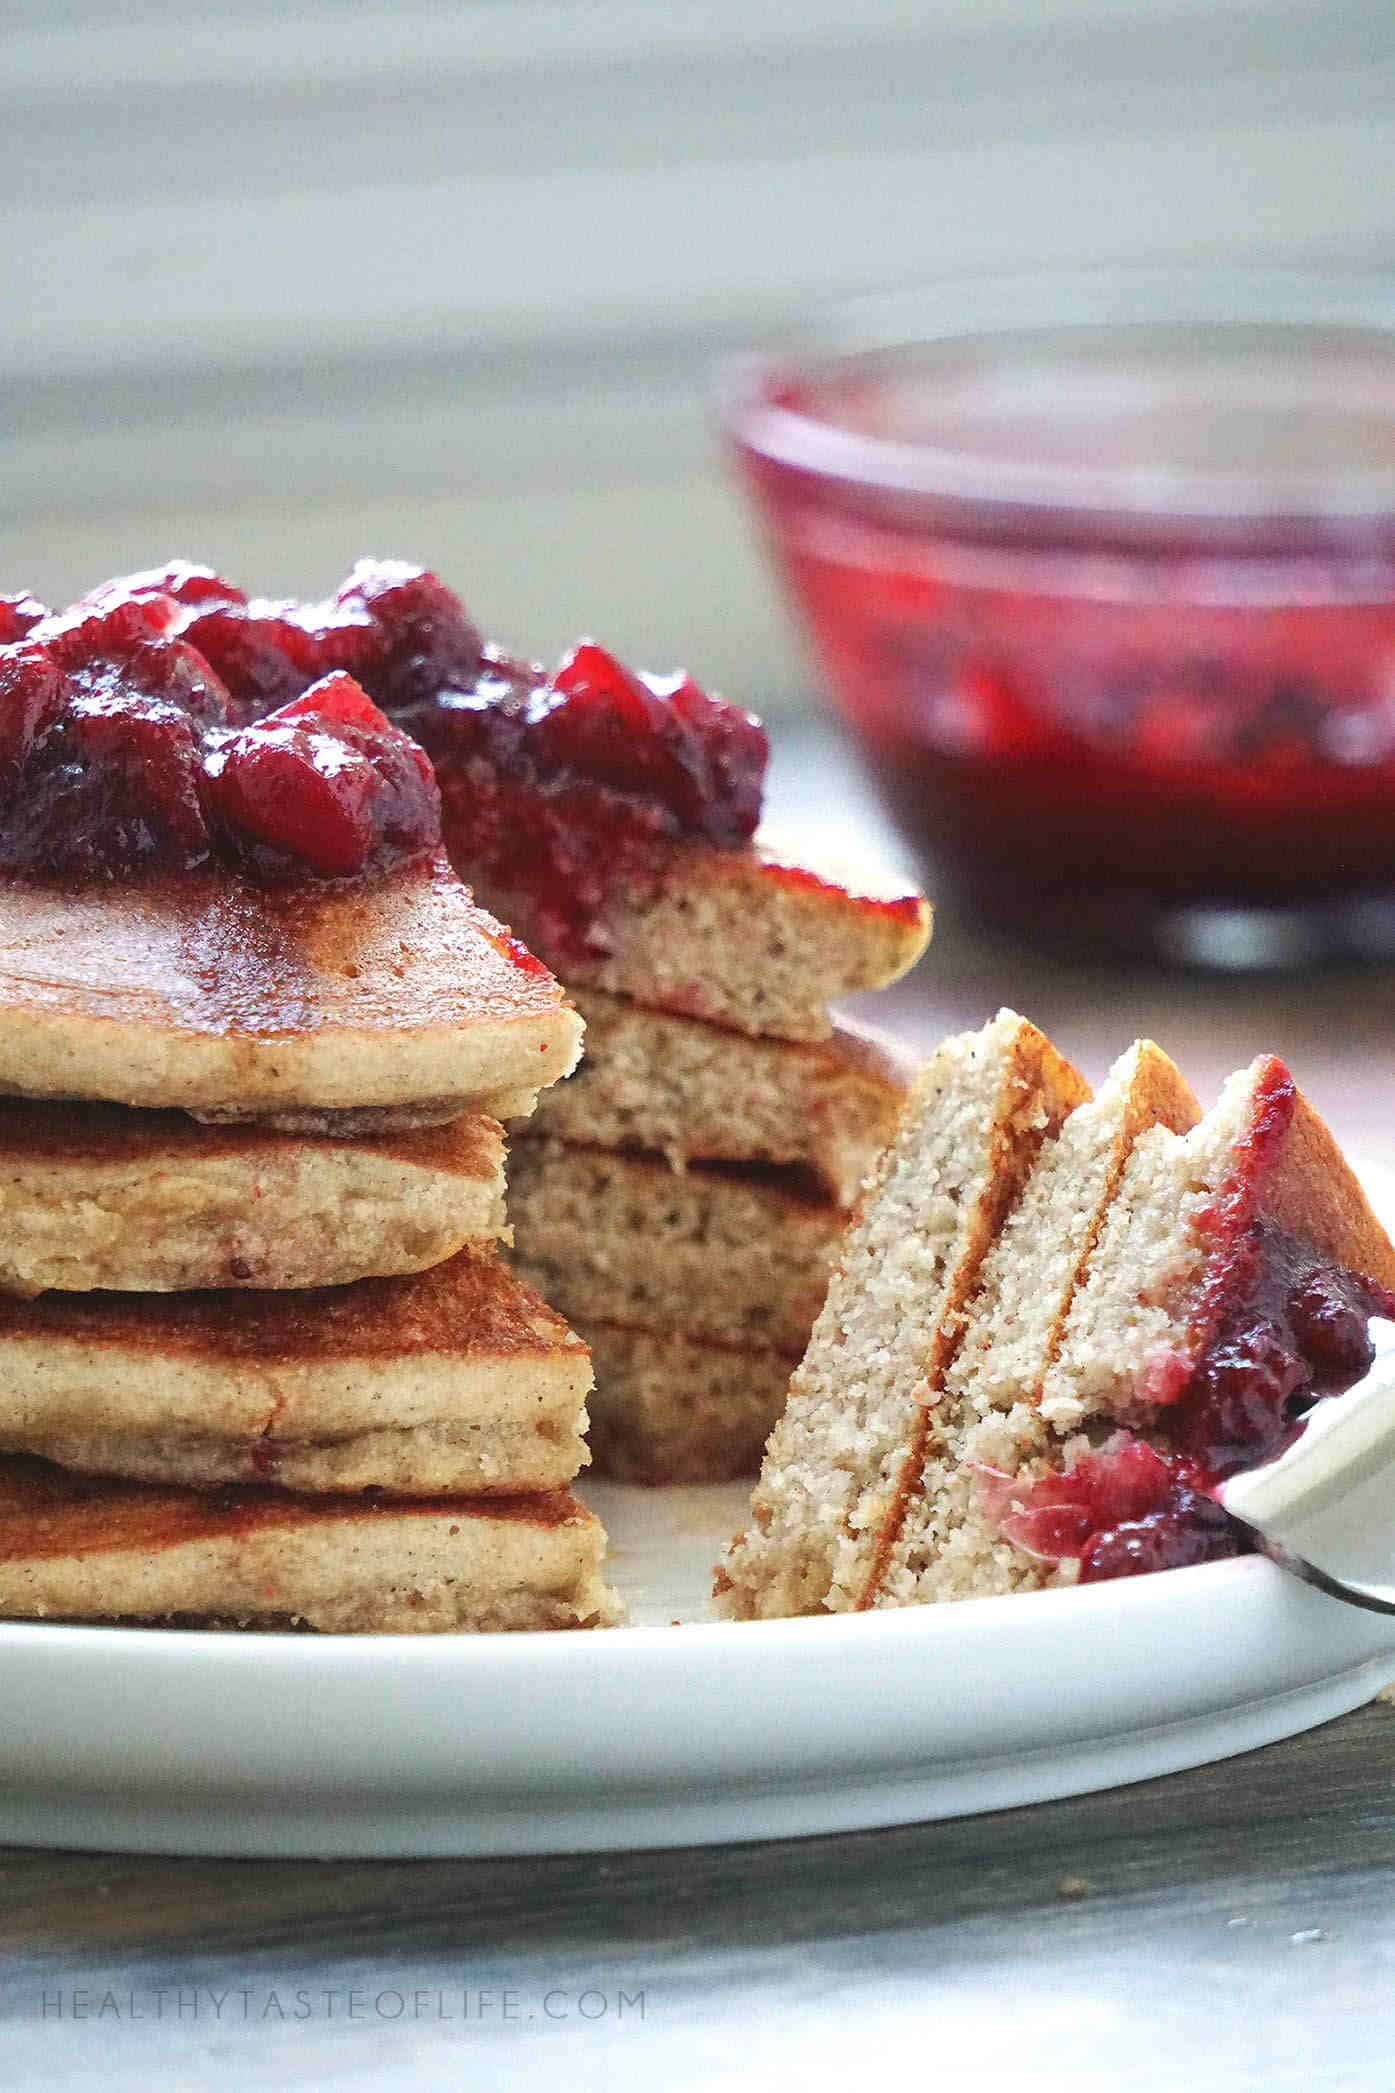 Healthy Gluten Free Sourdough Pancakes or Sorghum Pancakes Made With Clean Ingredients